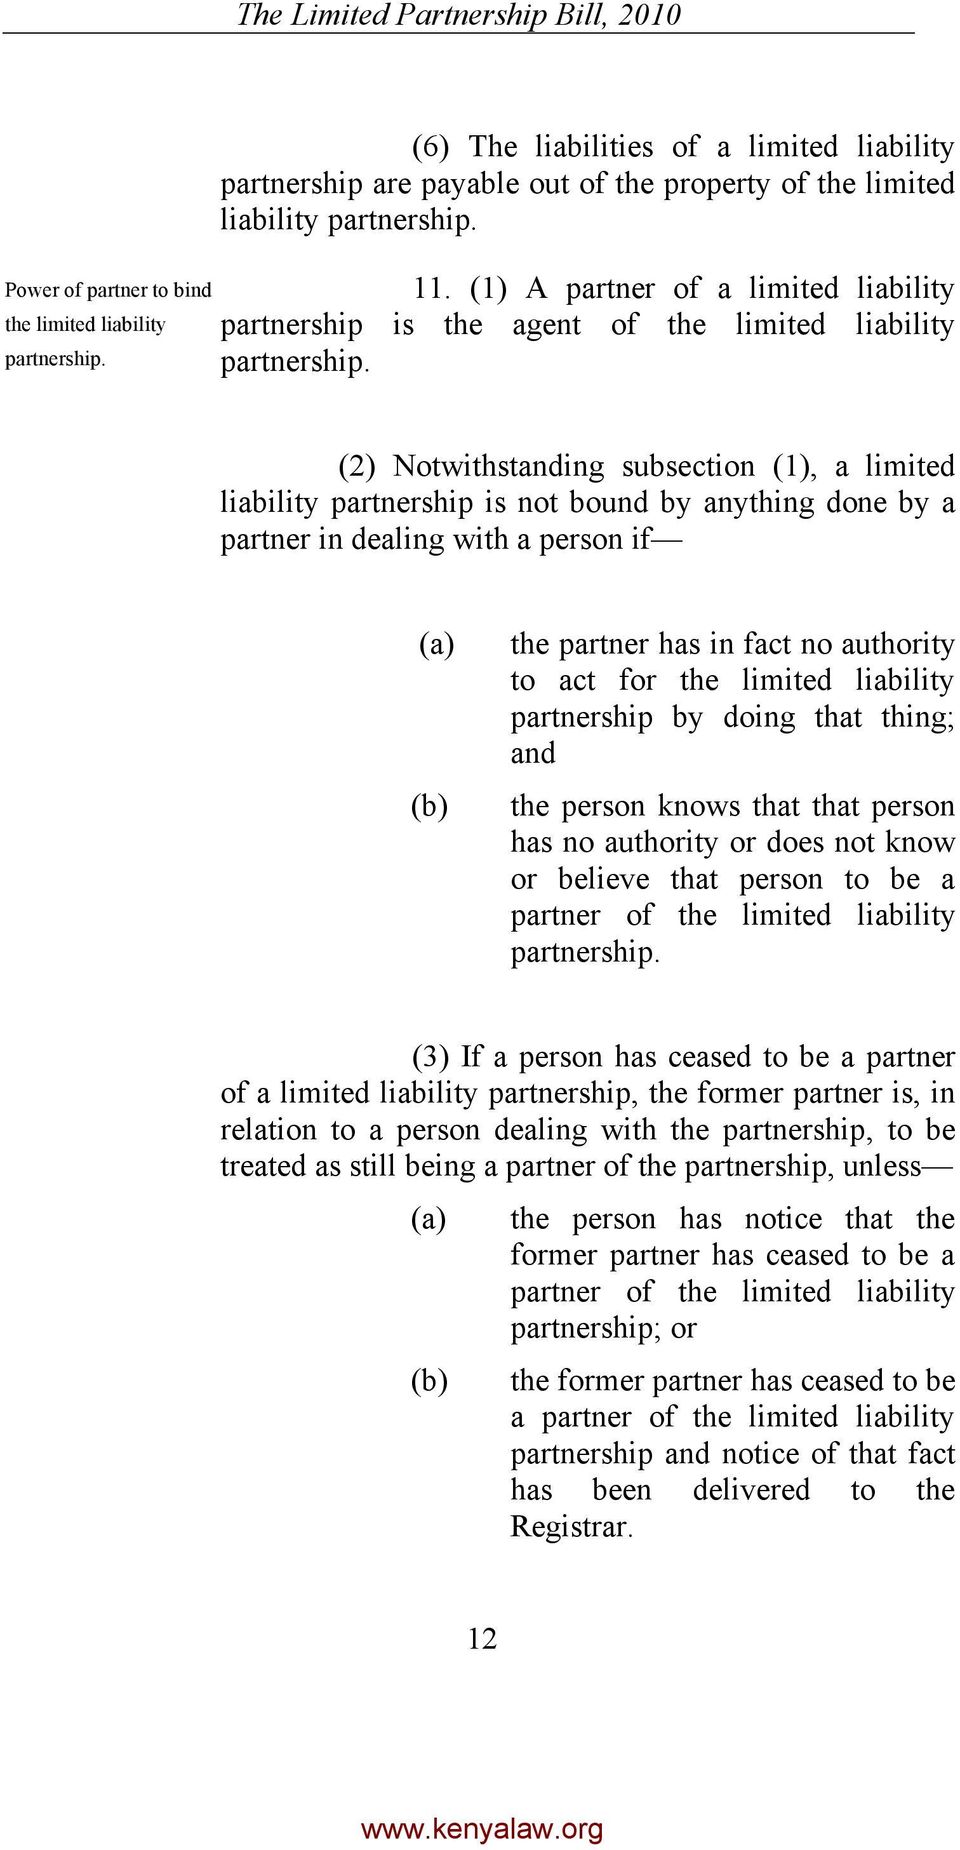 (2) Notwithstanding subsection (1), a limited liability partnership is not bound by anything done by a partner in dealing with a person if the partner has in fact no authority to act for the limited